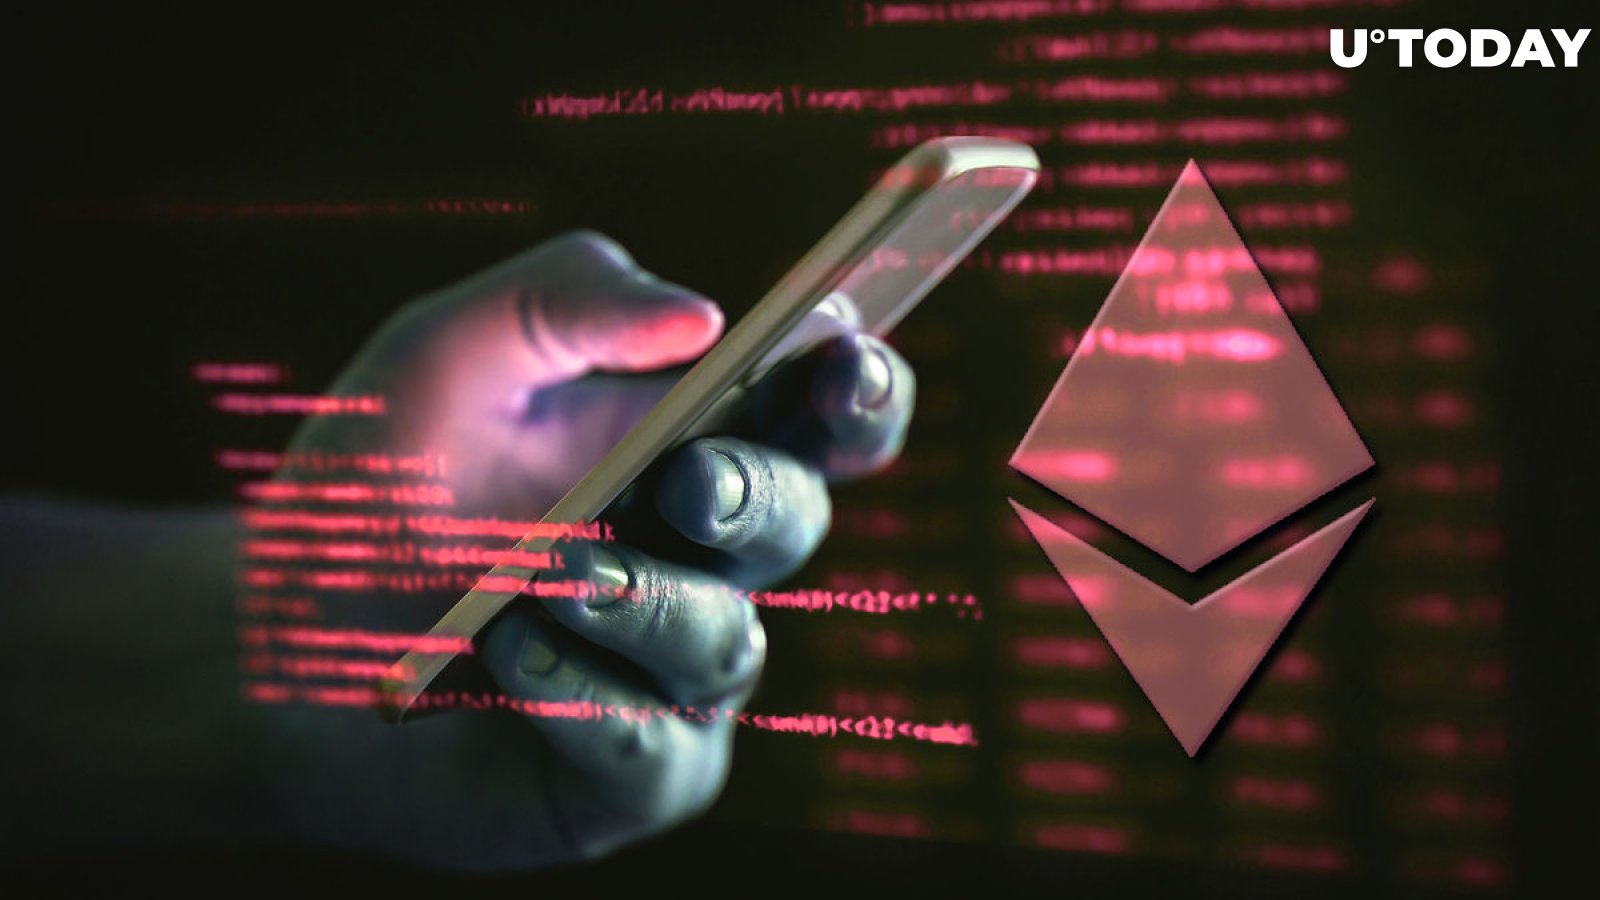 Scam Alert: EthereumPoW (ETHW) Community Targeted by Twitter Scam Campaign